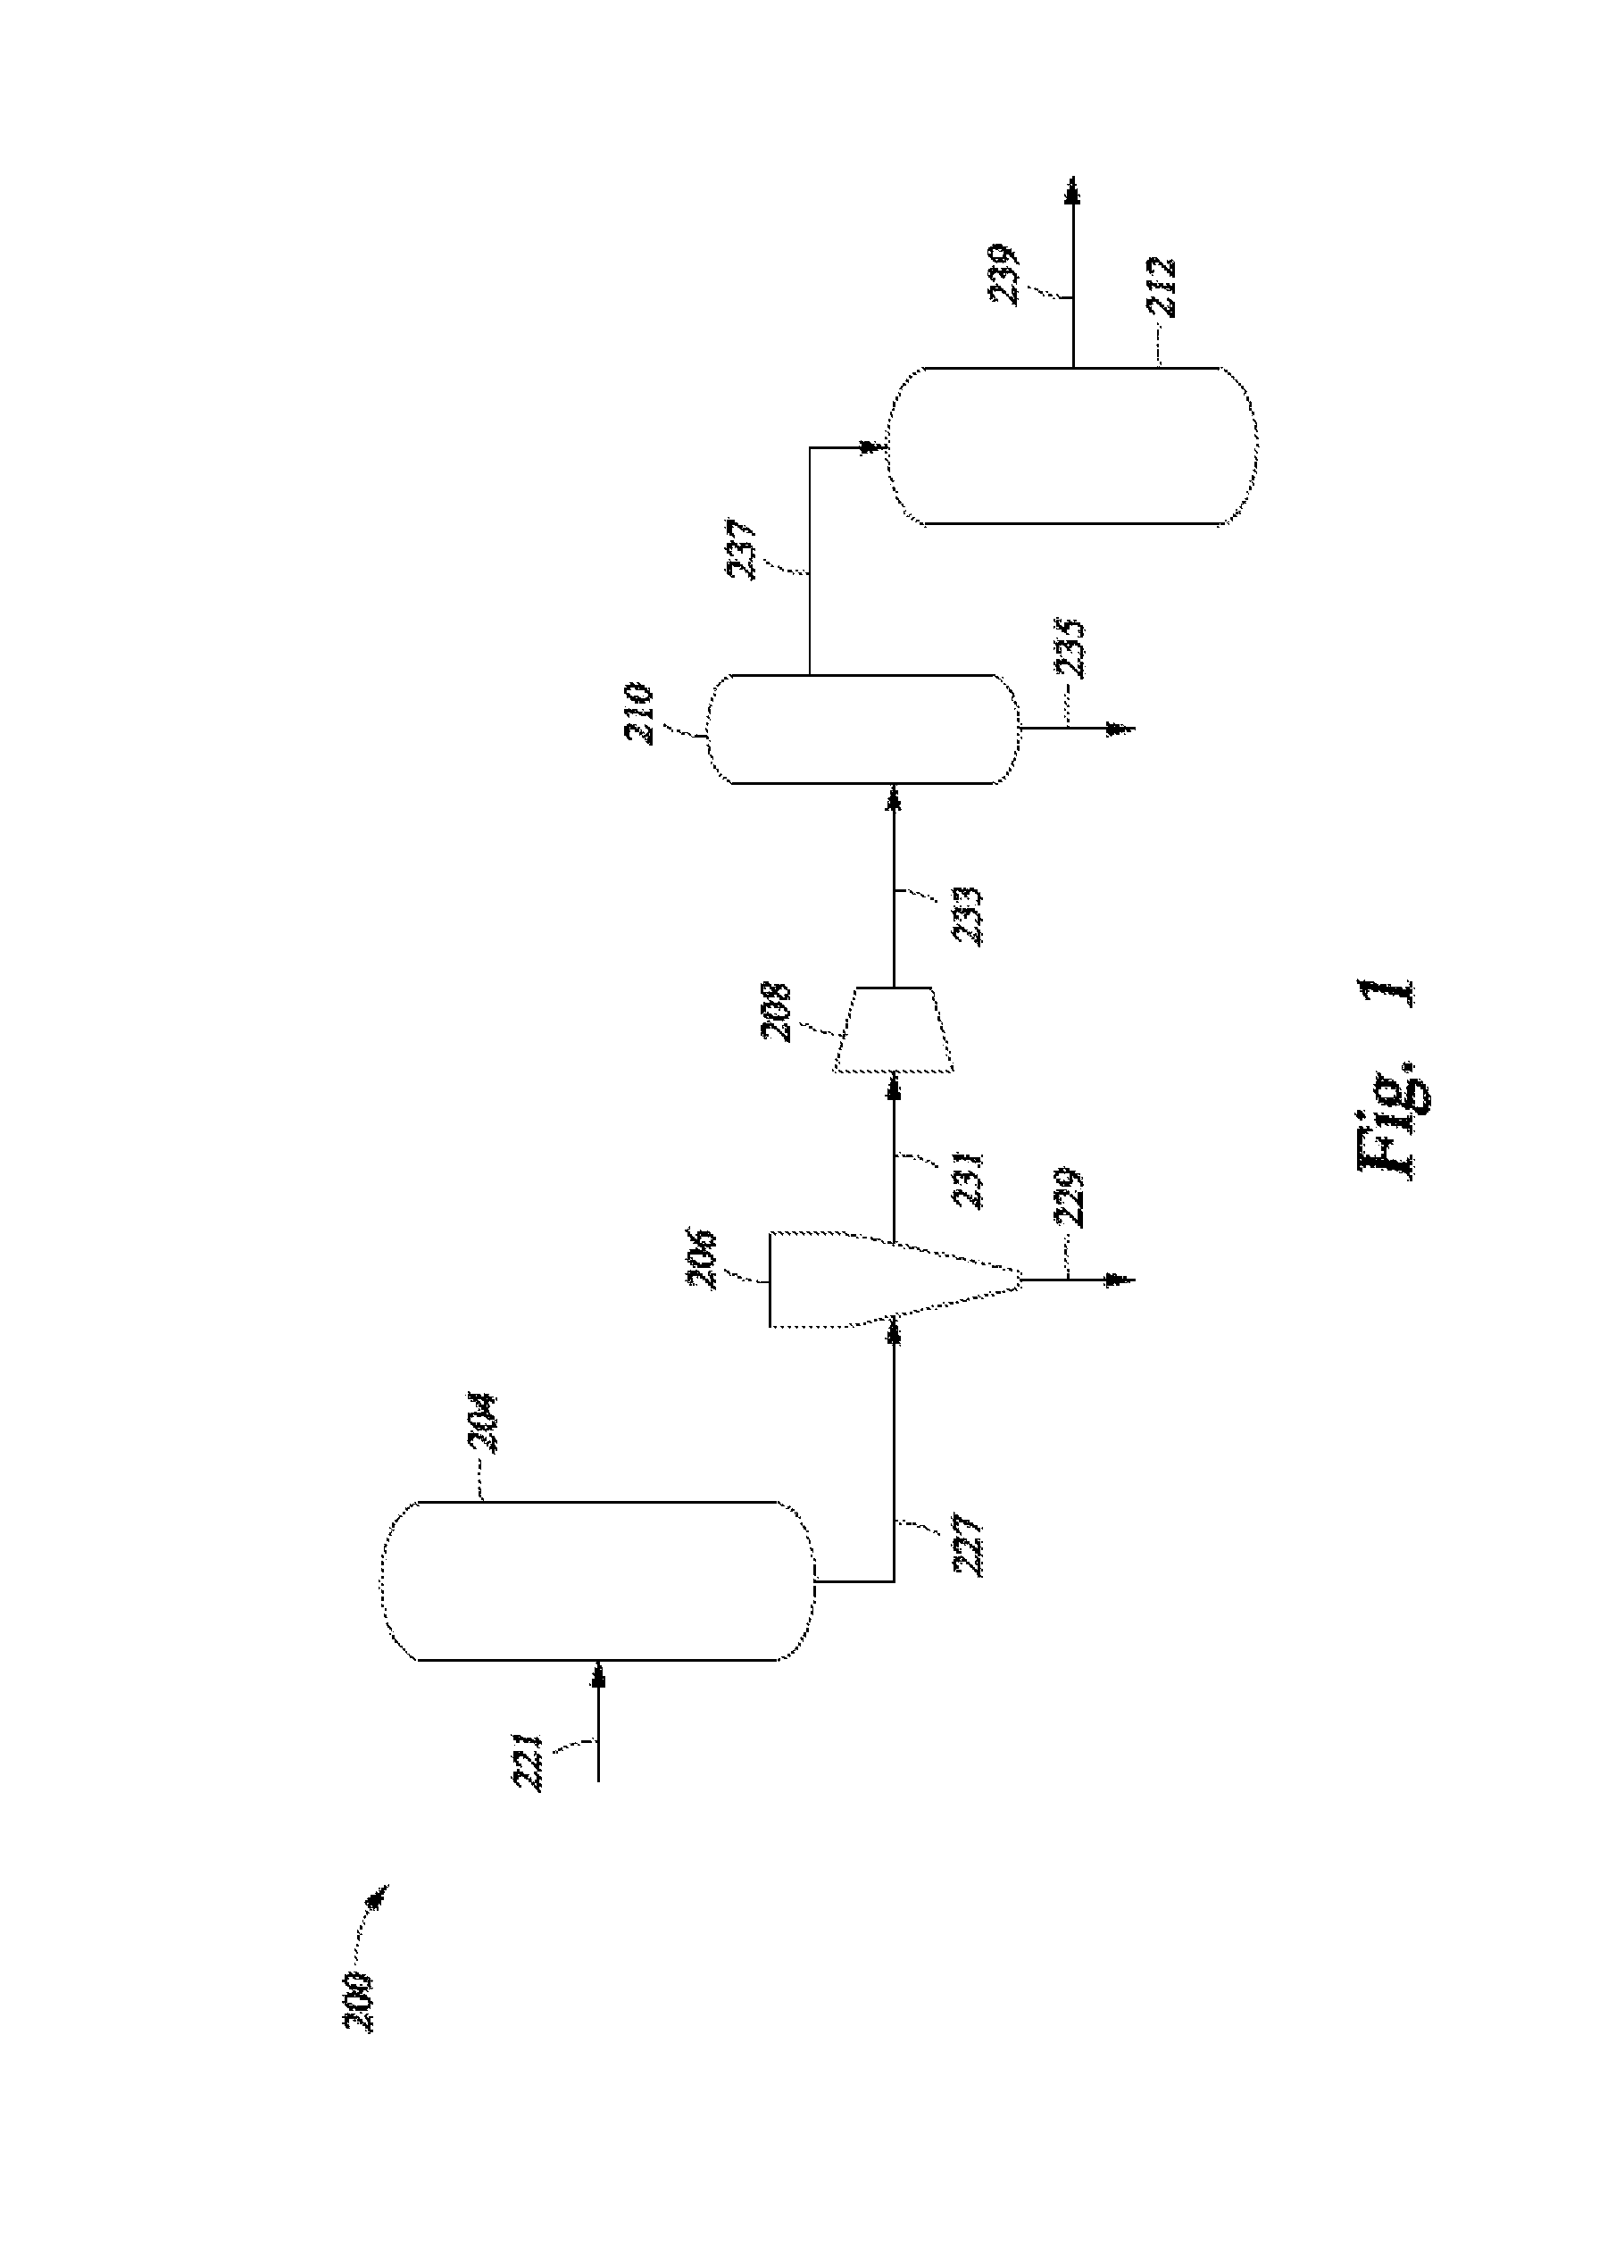 Selective hydrogenation of alkynyl-containing compounds